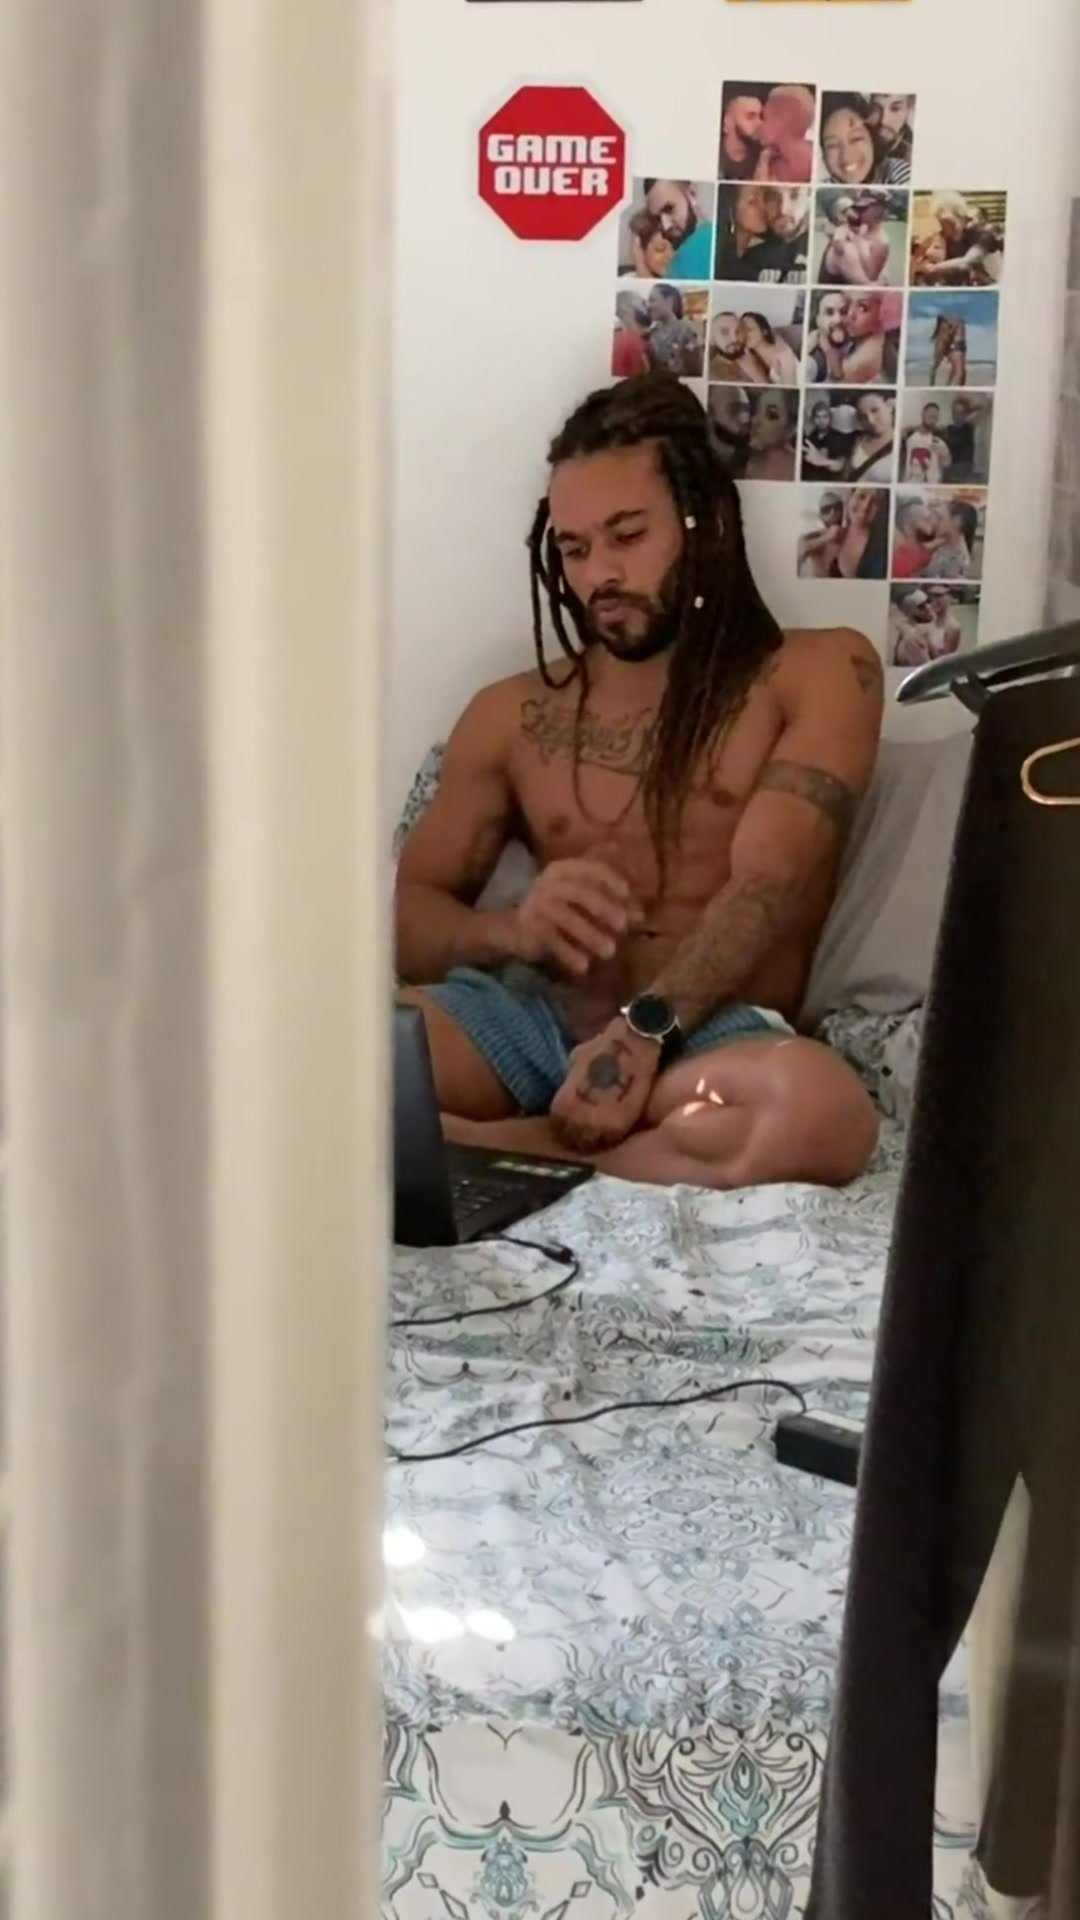 Caught Jerking Off - Long haired man caught jerking off while watching porn - ThisVid.com